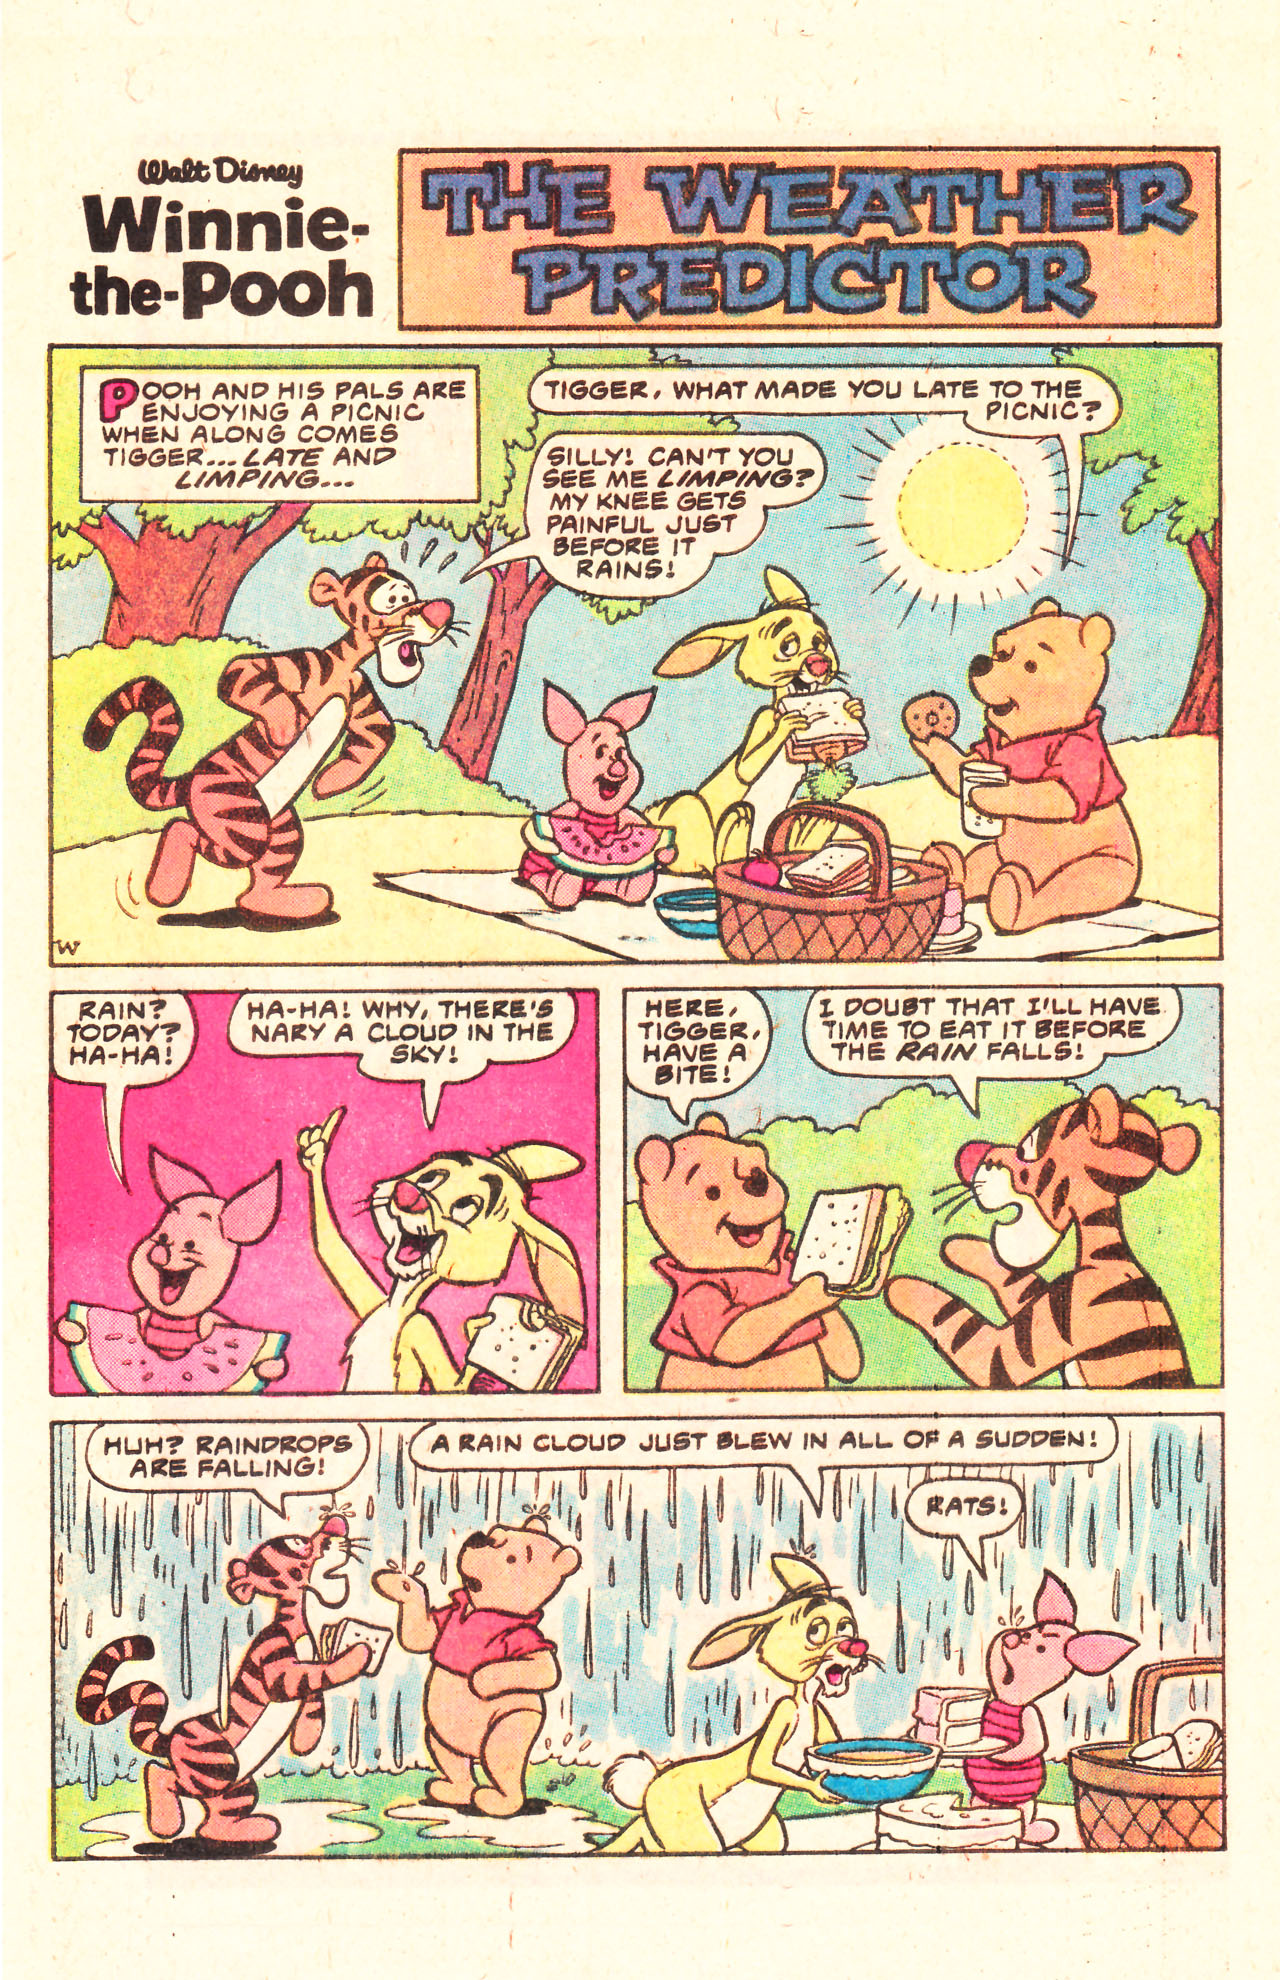 Read online Winnie-the-Pooh comic -  Issue #18 - 24